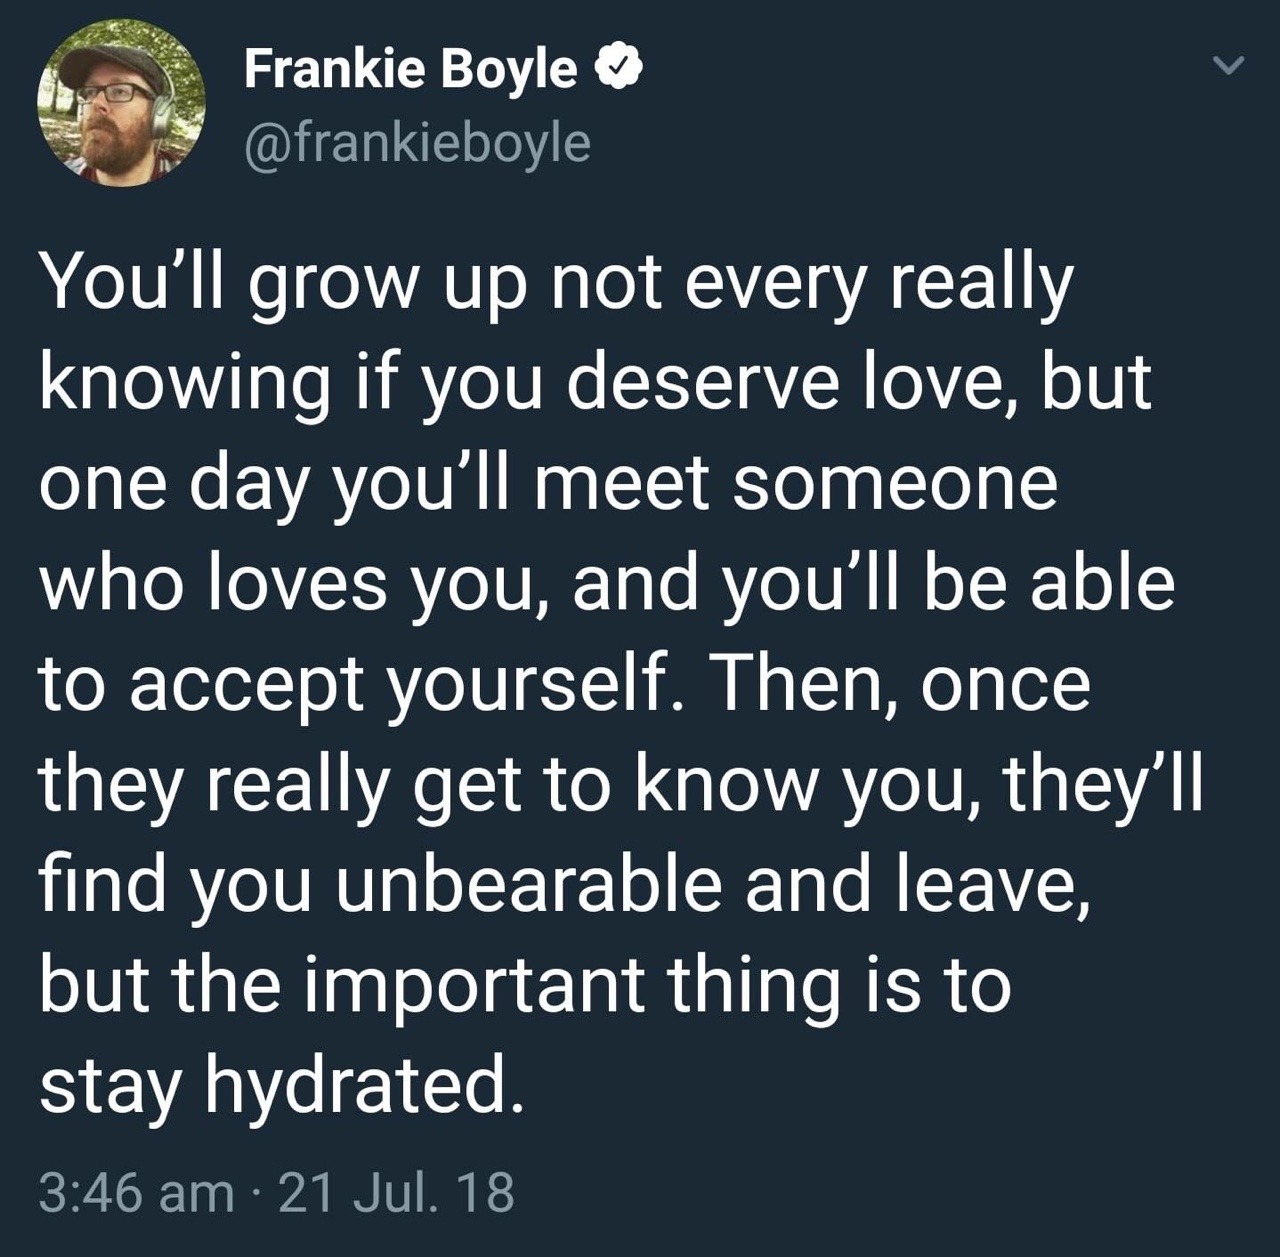 stay hydrated joke - Frankie Boyle You'll grow up not every really knowing if you deserve love, but one day you'll meet someone who loves you, and you'll be able to accept yourself. Then, once they really get to know you, they'll find you unbearable and l